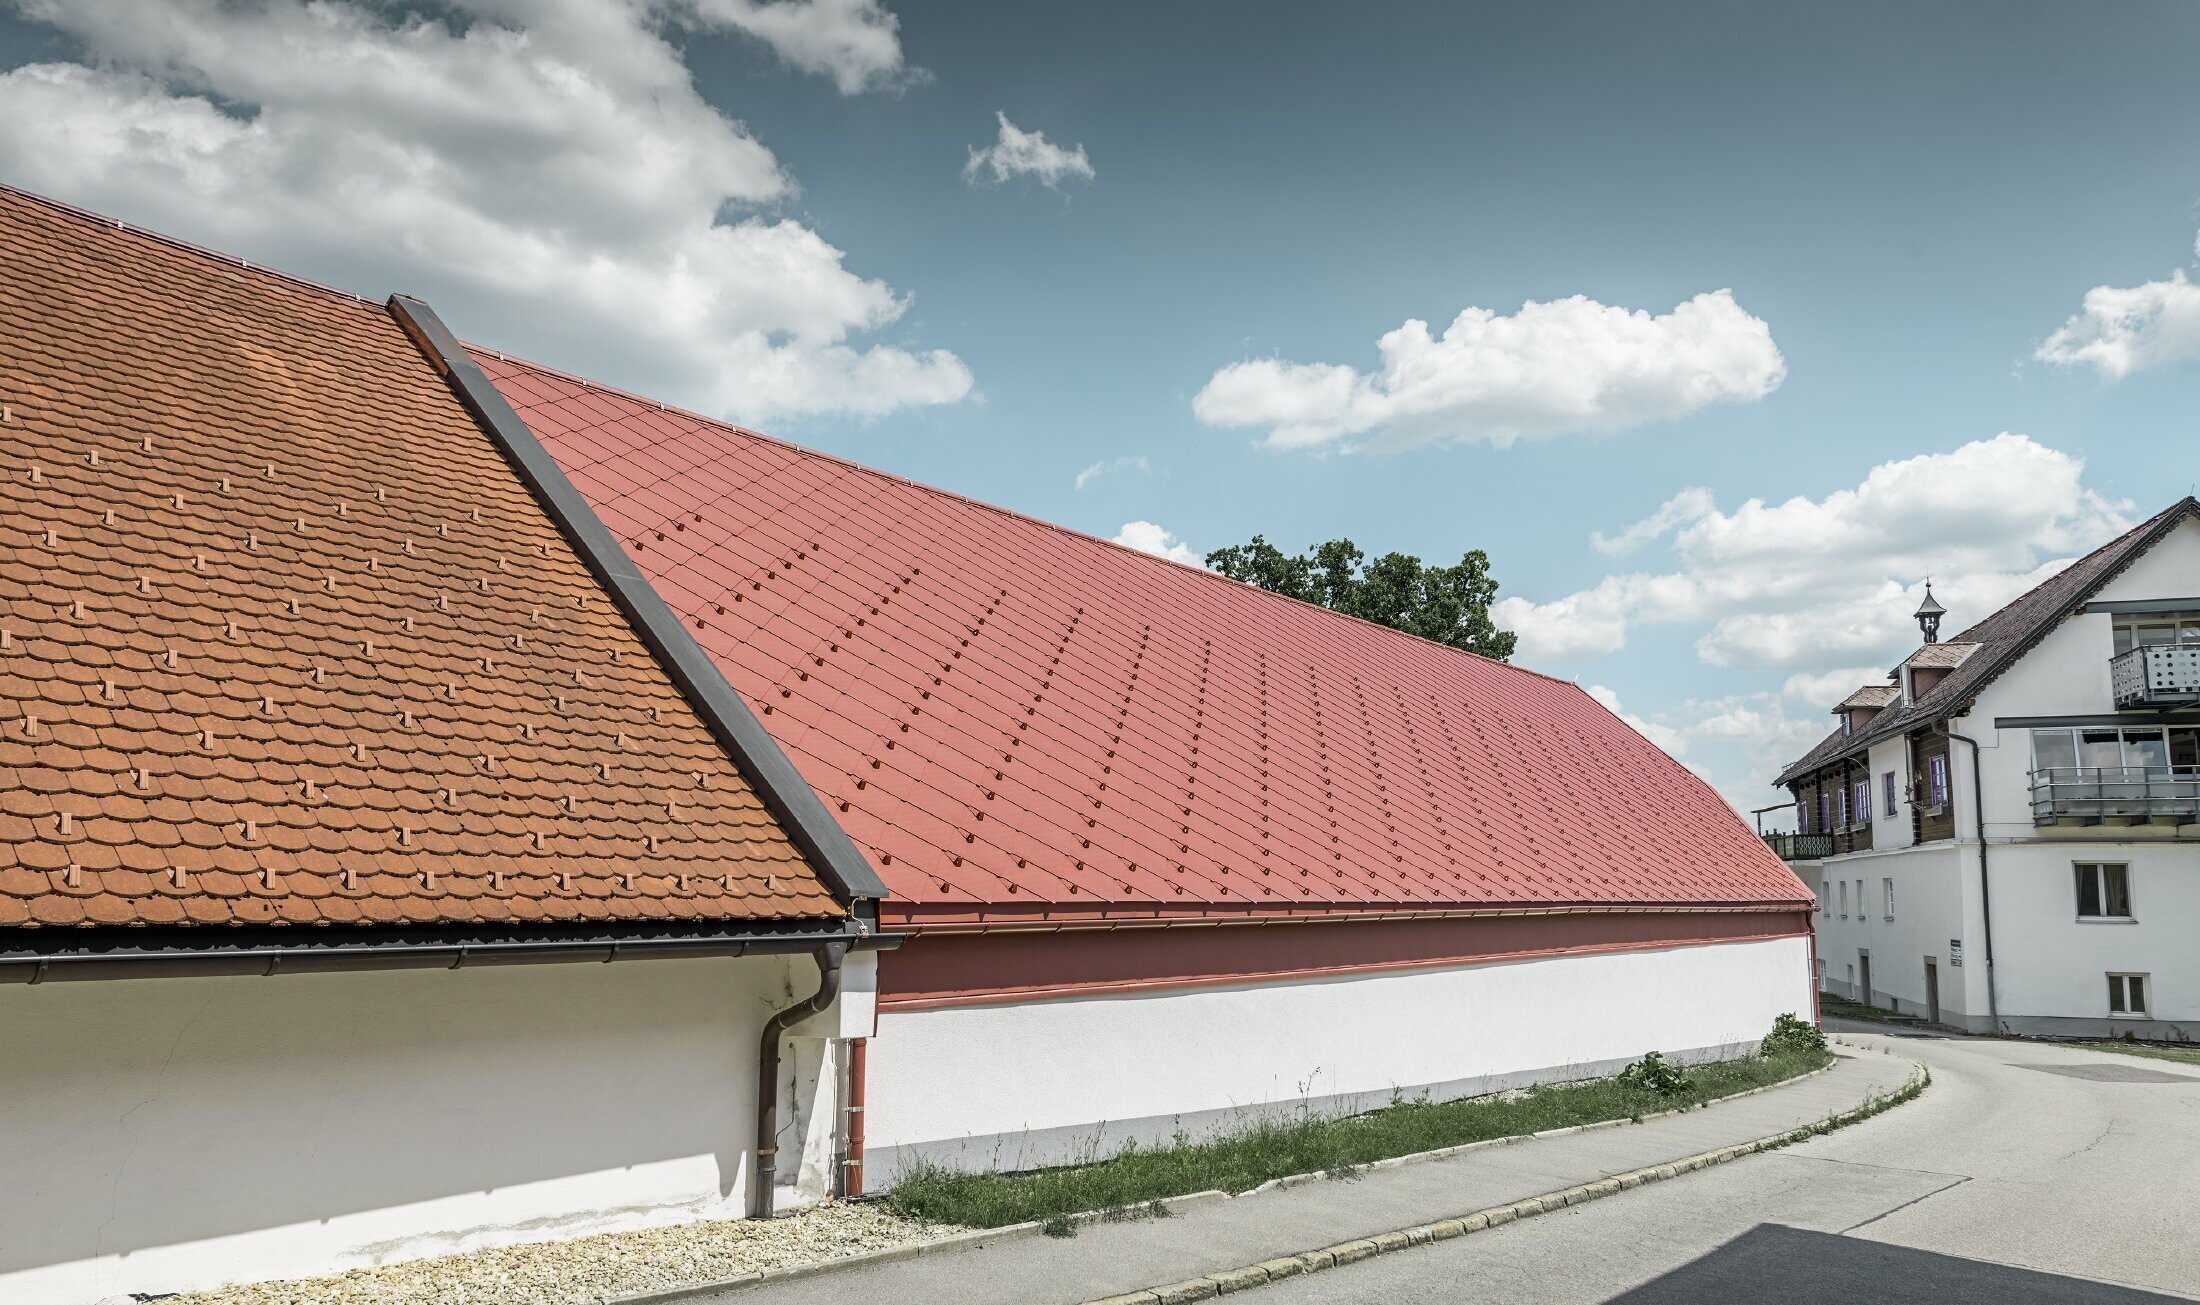 Exterior view of the Kerzenwelt candle store in Schlägl; the roof was covered with the large PREFA 44 x 44 aluminium rhomboid tile in oxide red.